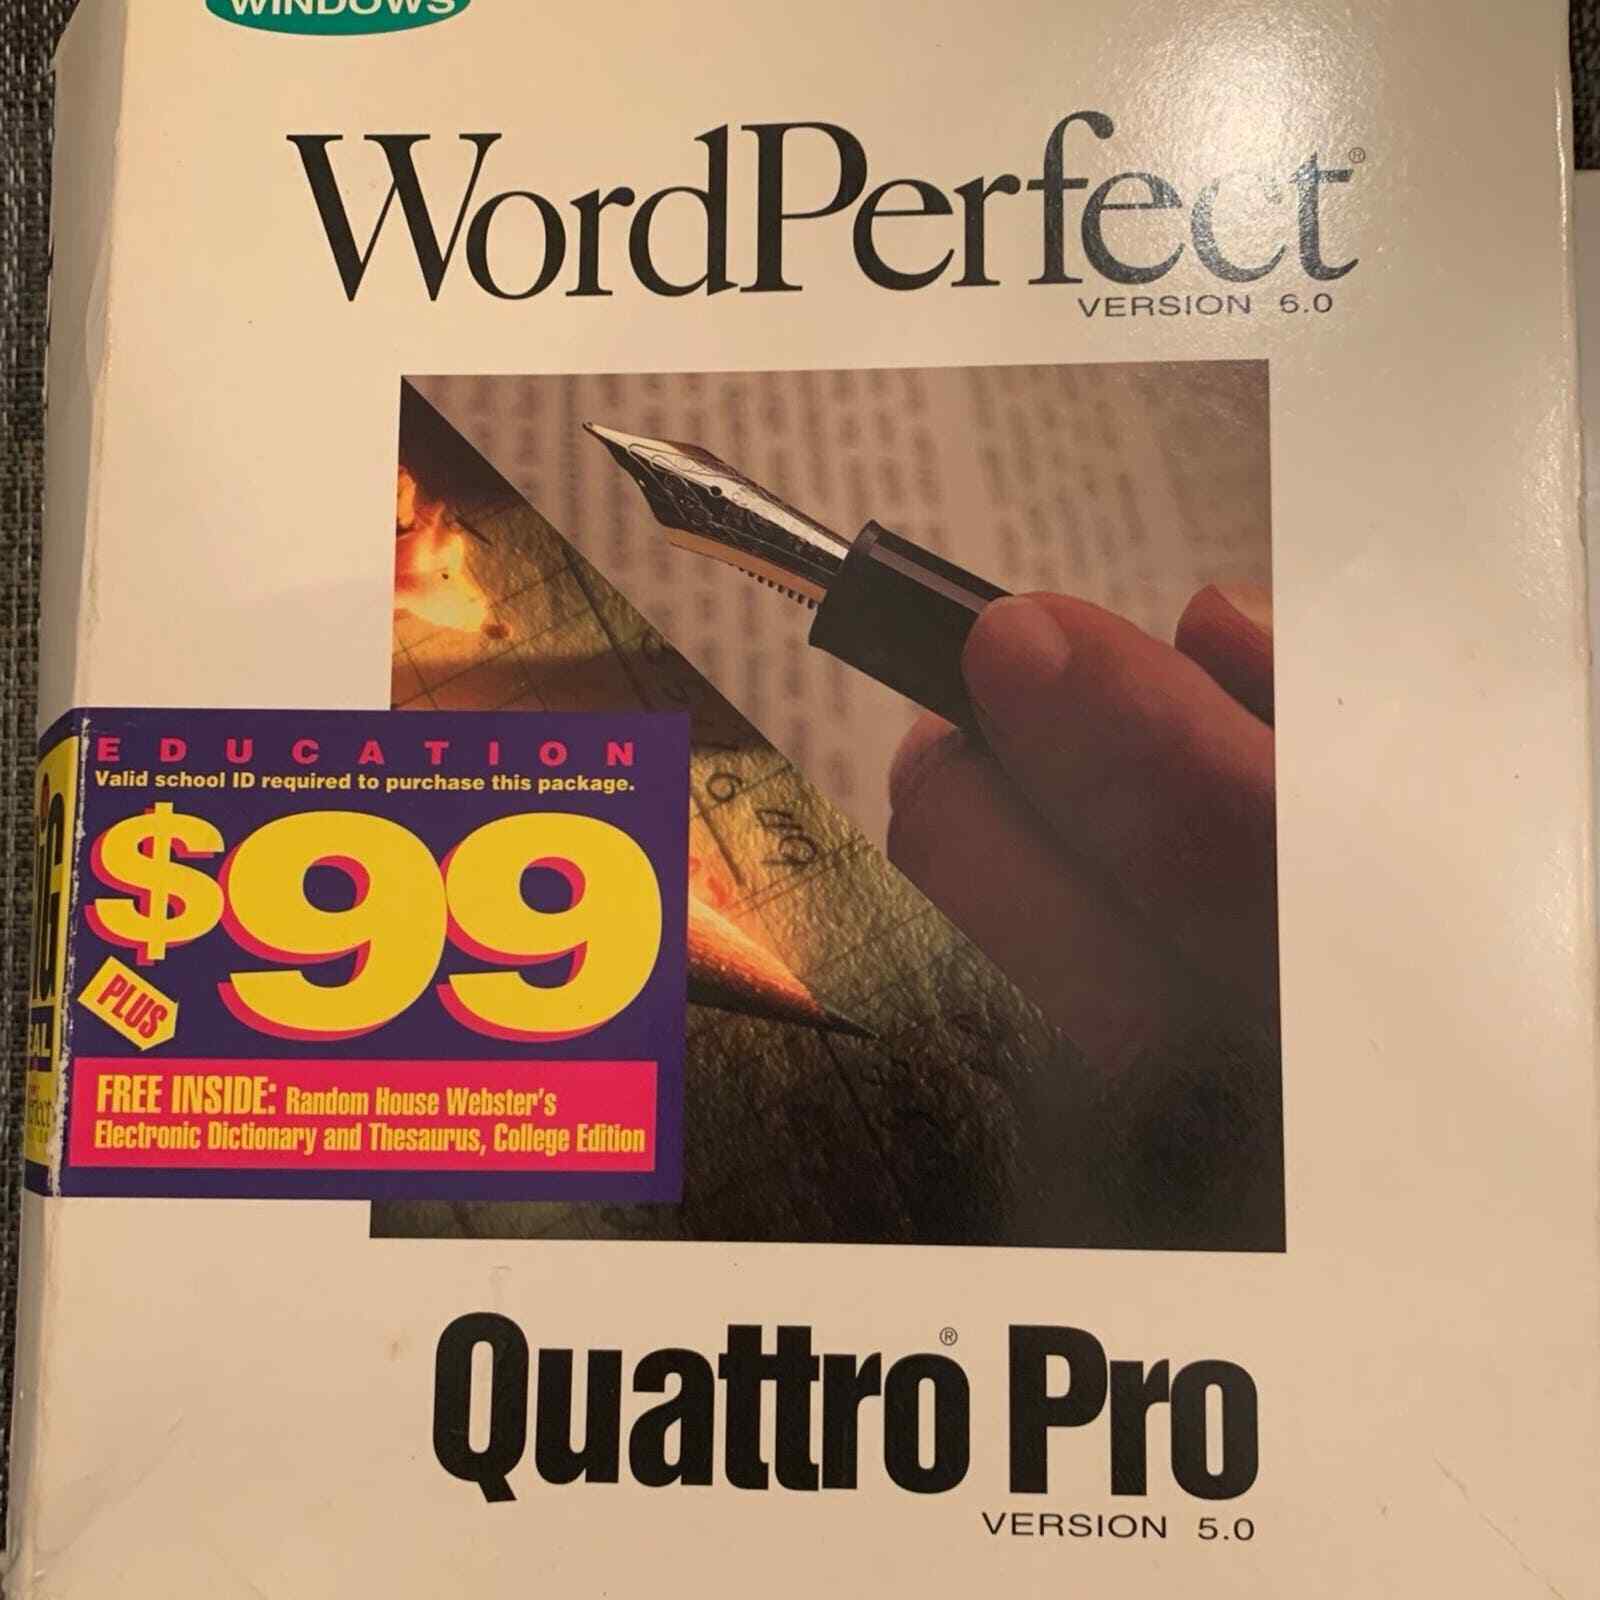 Vintage computer word processing software